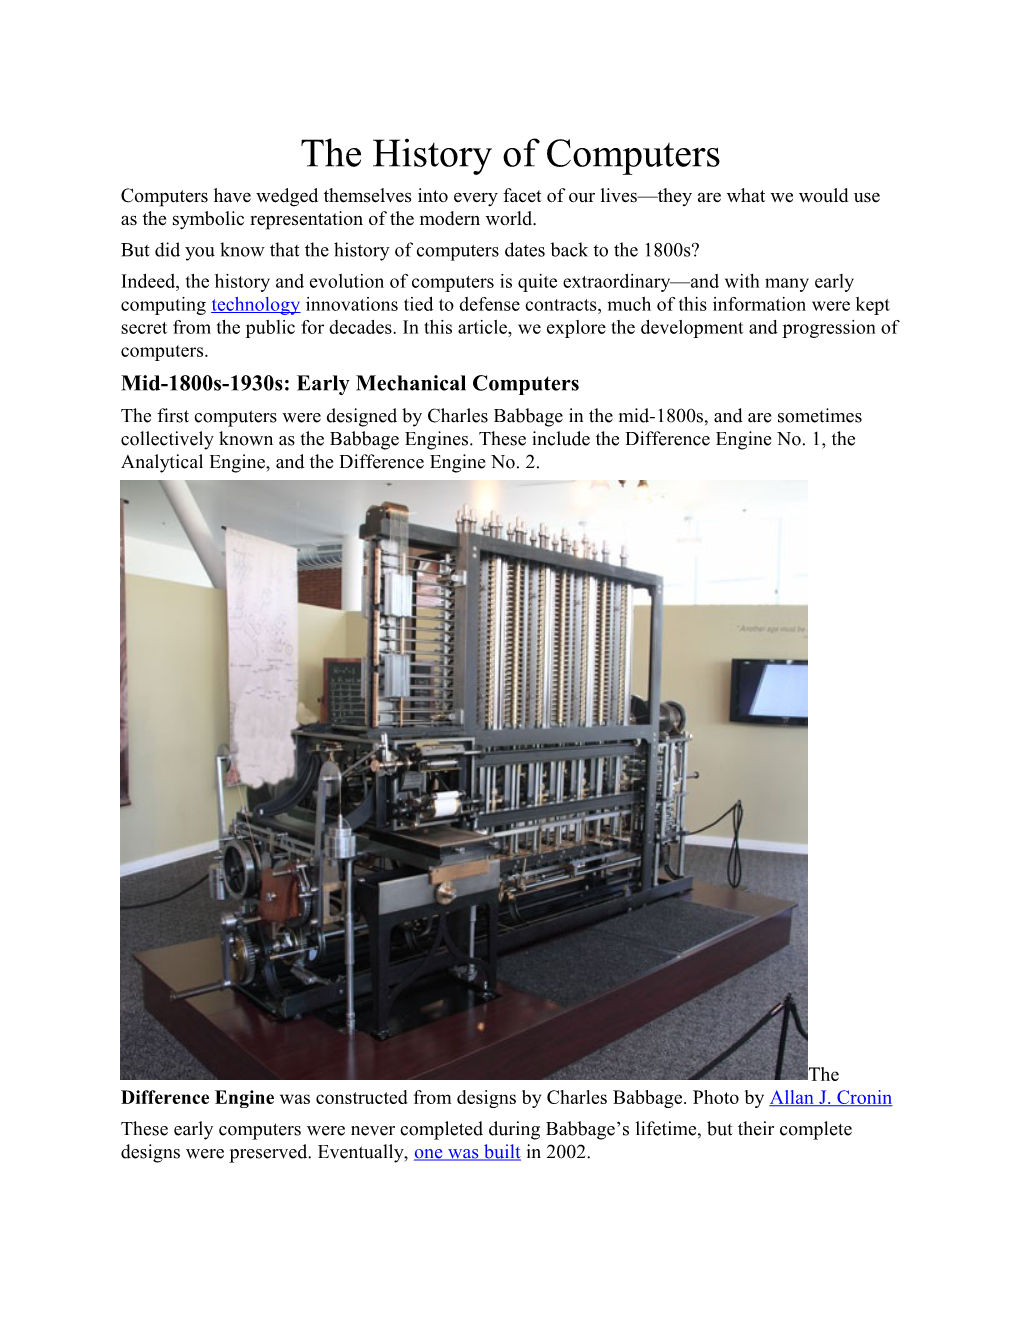 But Did You Know That the History of Computers Dates Back to the 1800S?